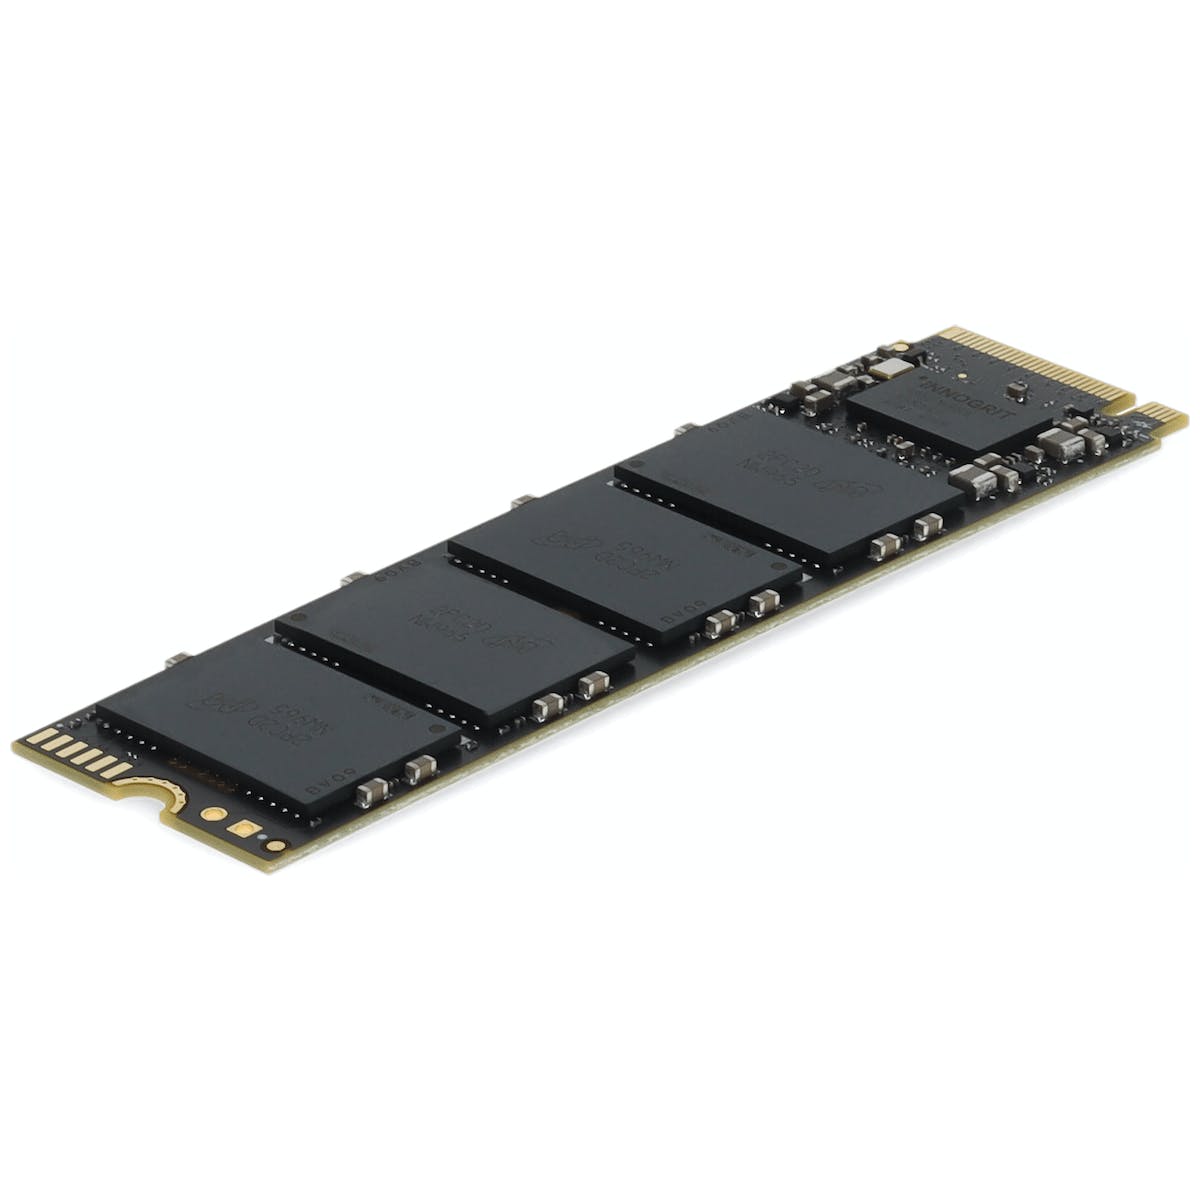 Picture of Add-On ADD-SSDTS2TB-D8 2TB M.2 2280 PCIe Gen 3 x4 NVMe 1.4 SSD